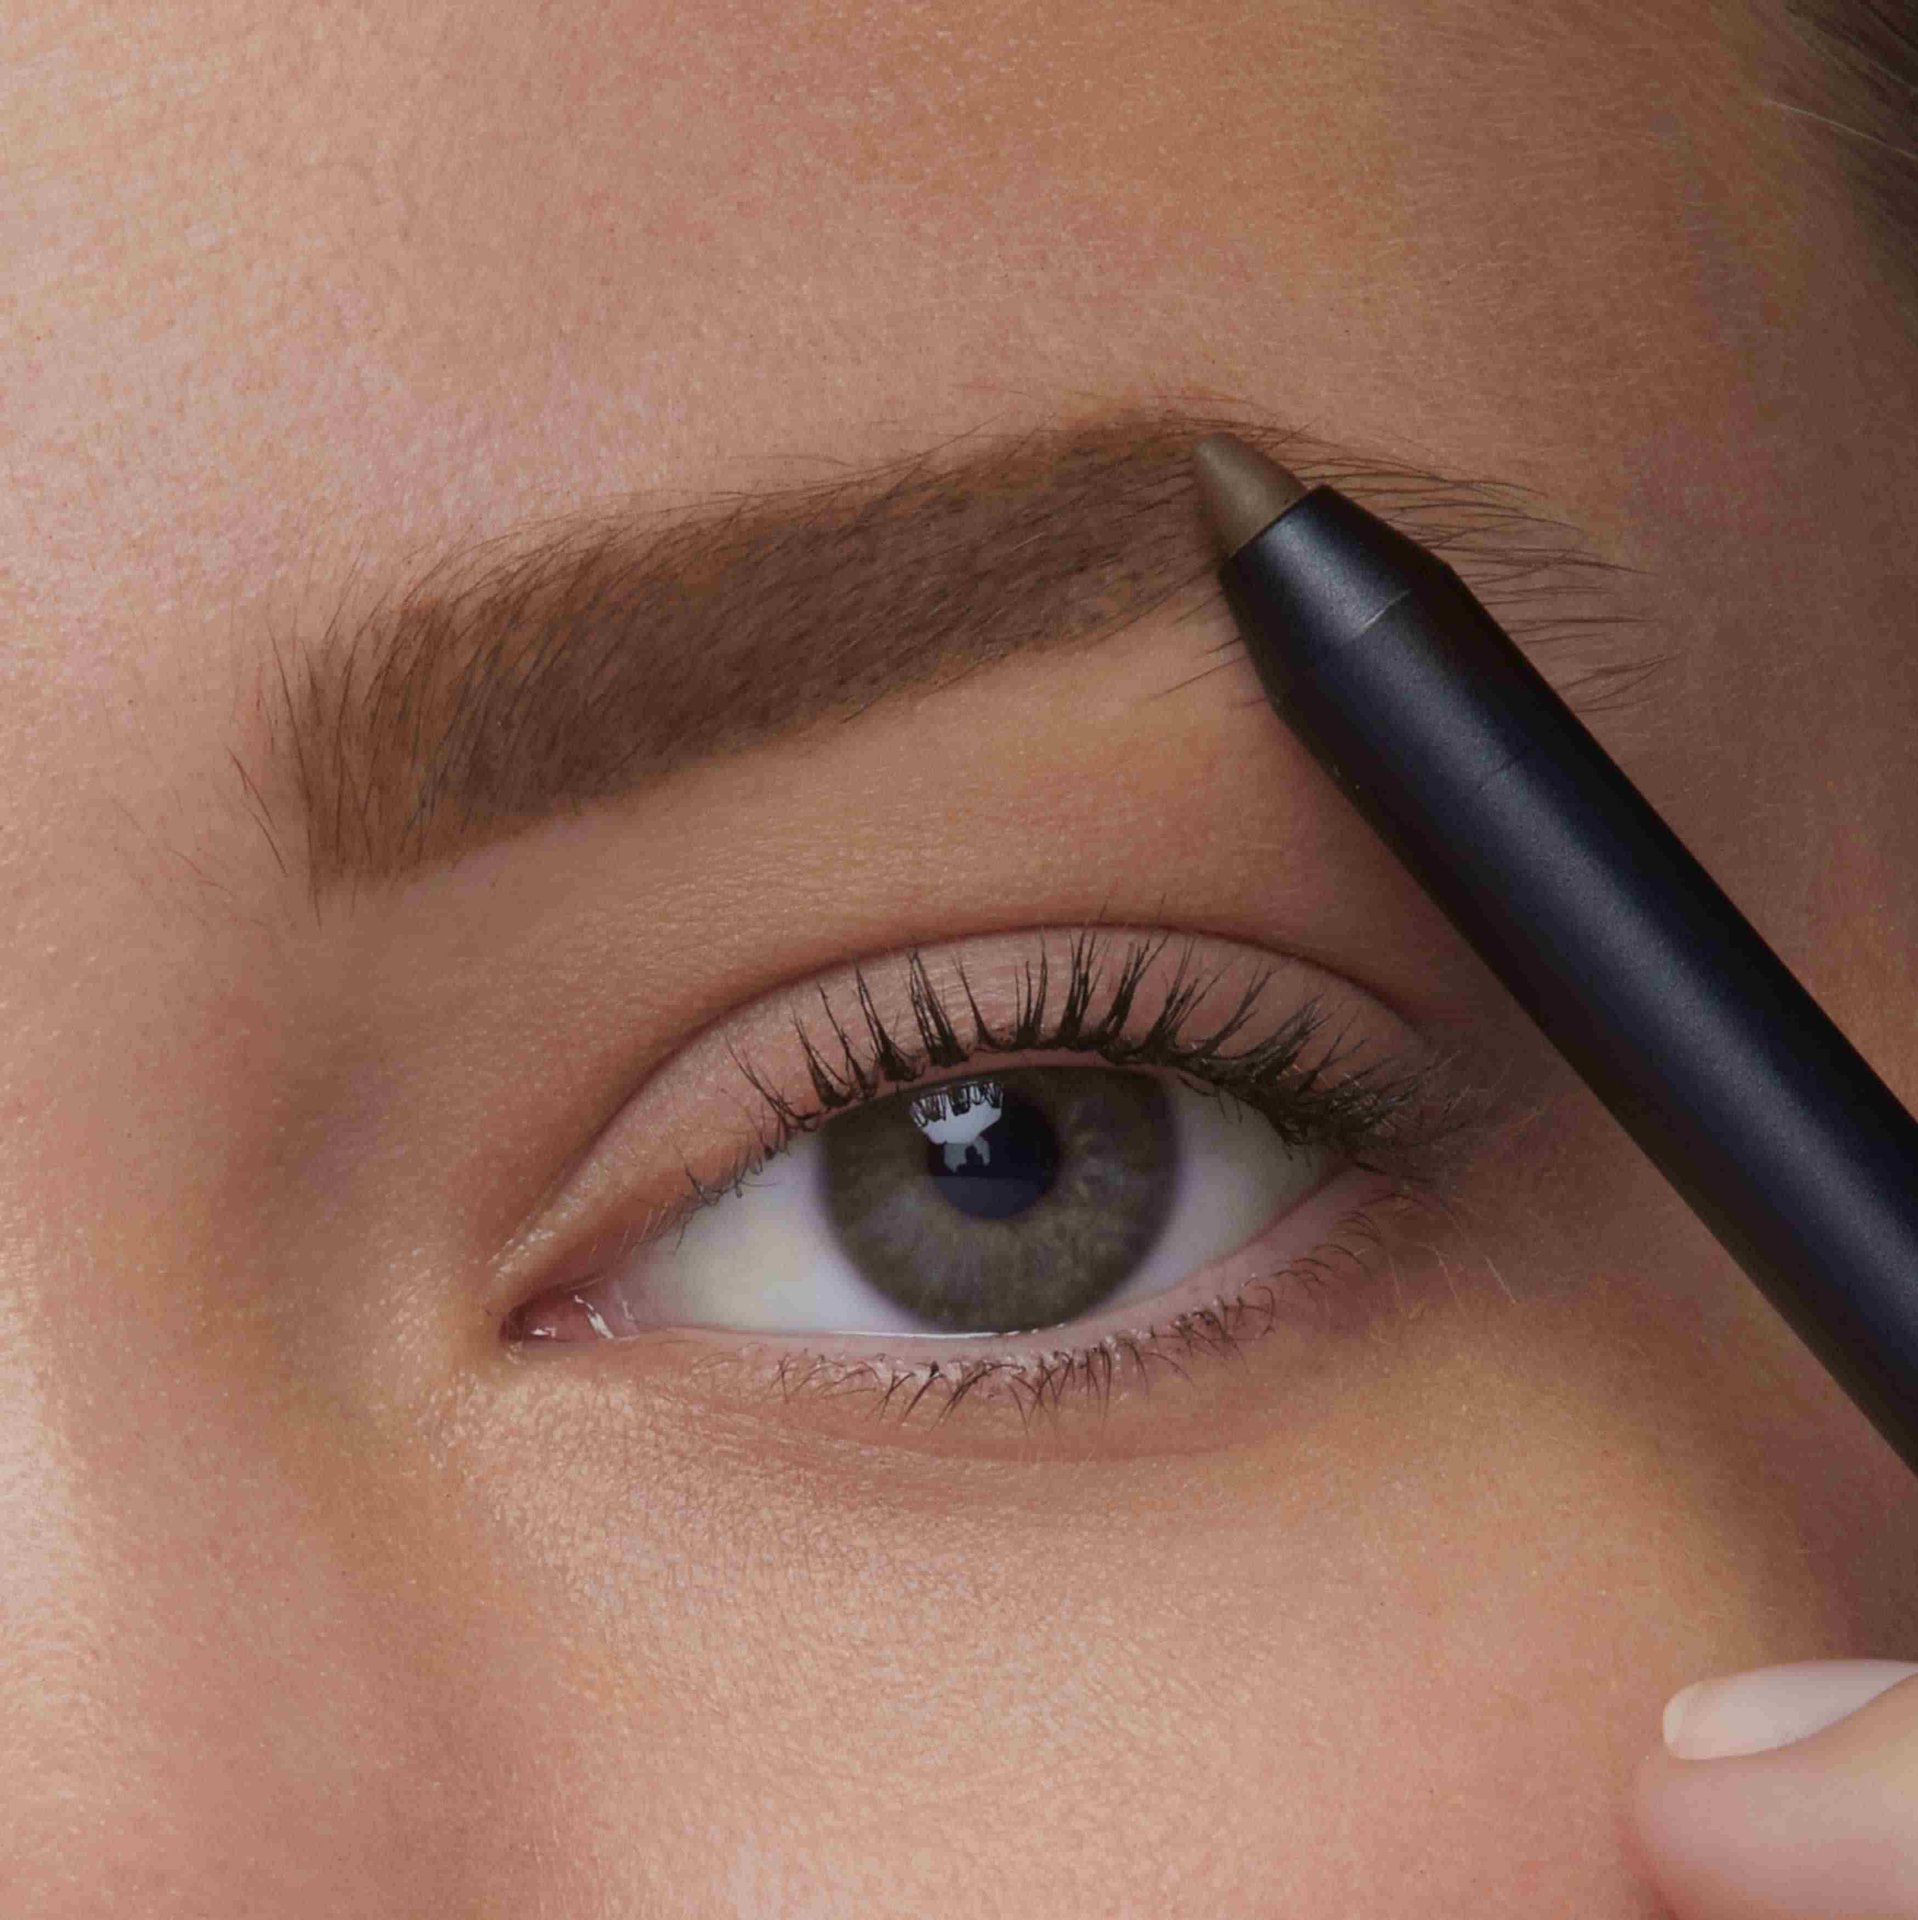 Shop The Best Eyebrow Makeup for All Brow Styles - Maybelline